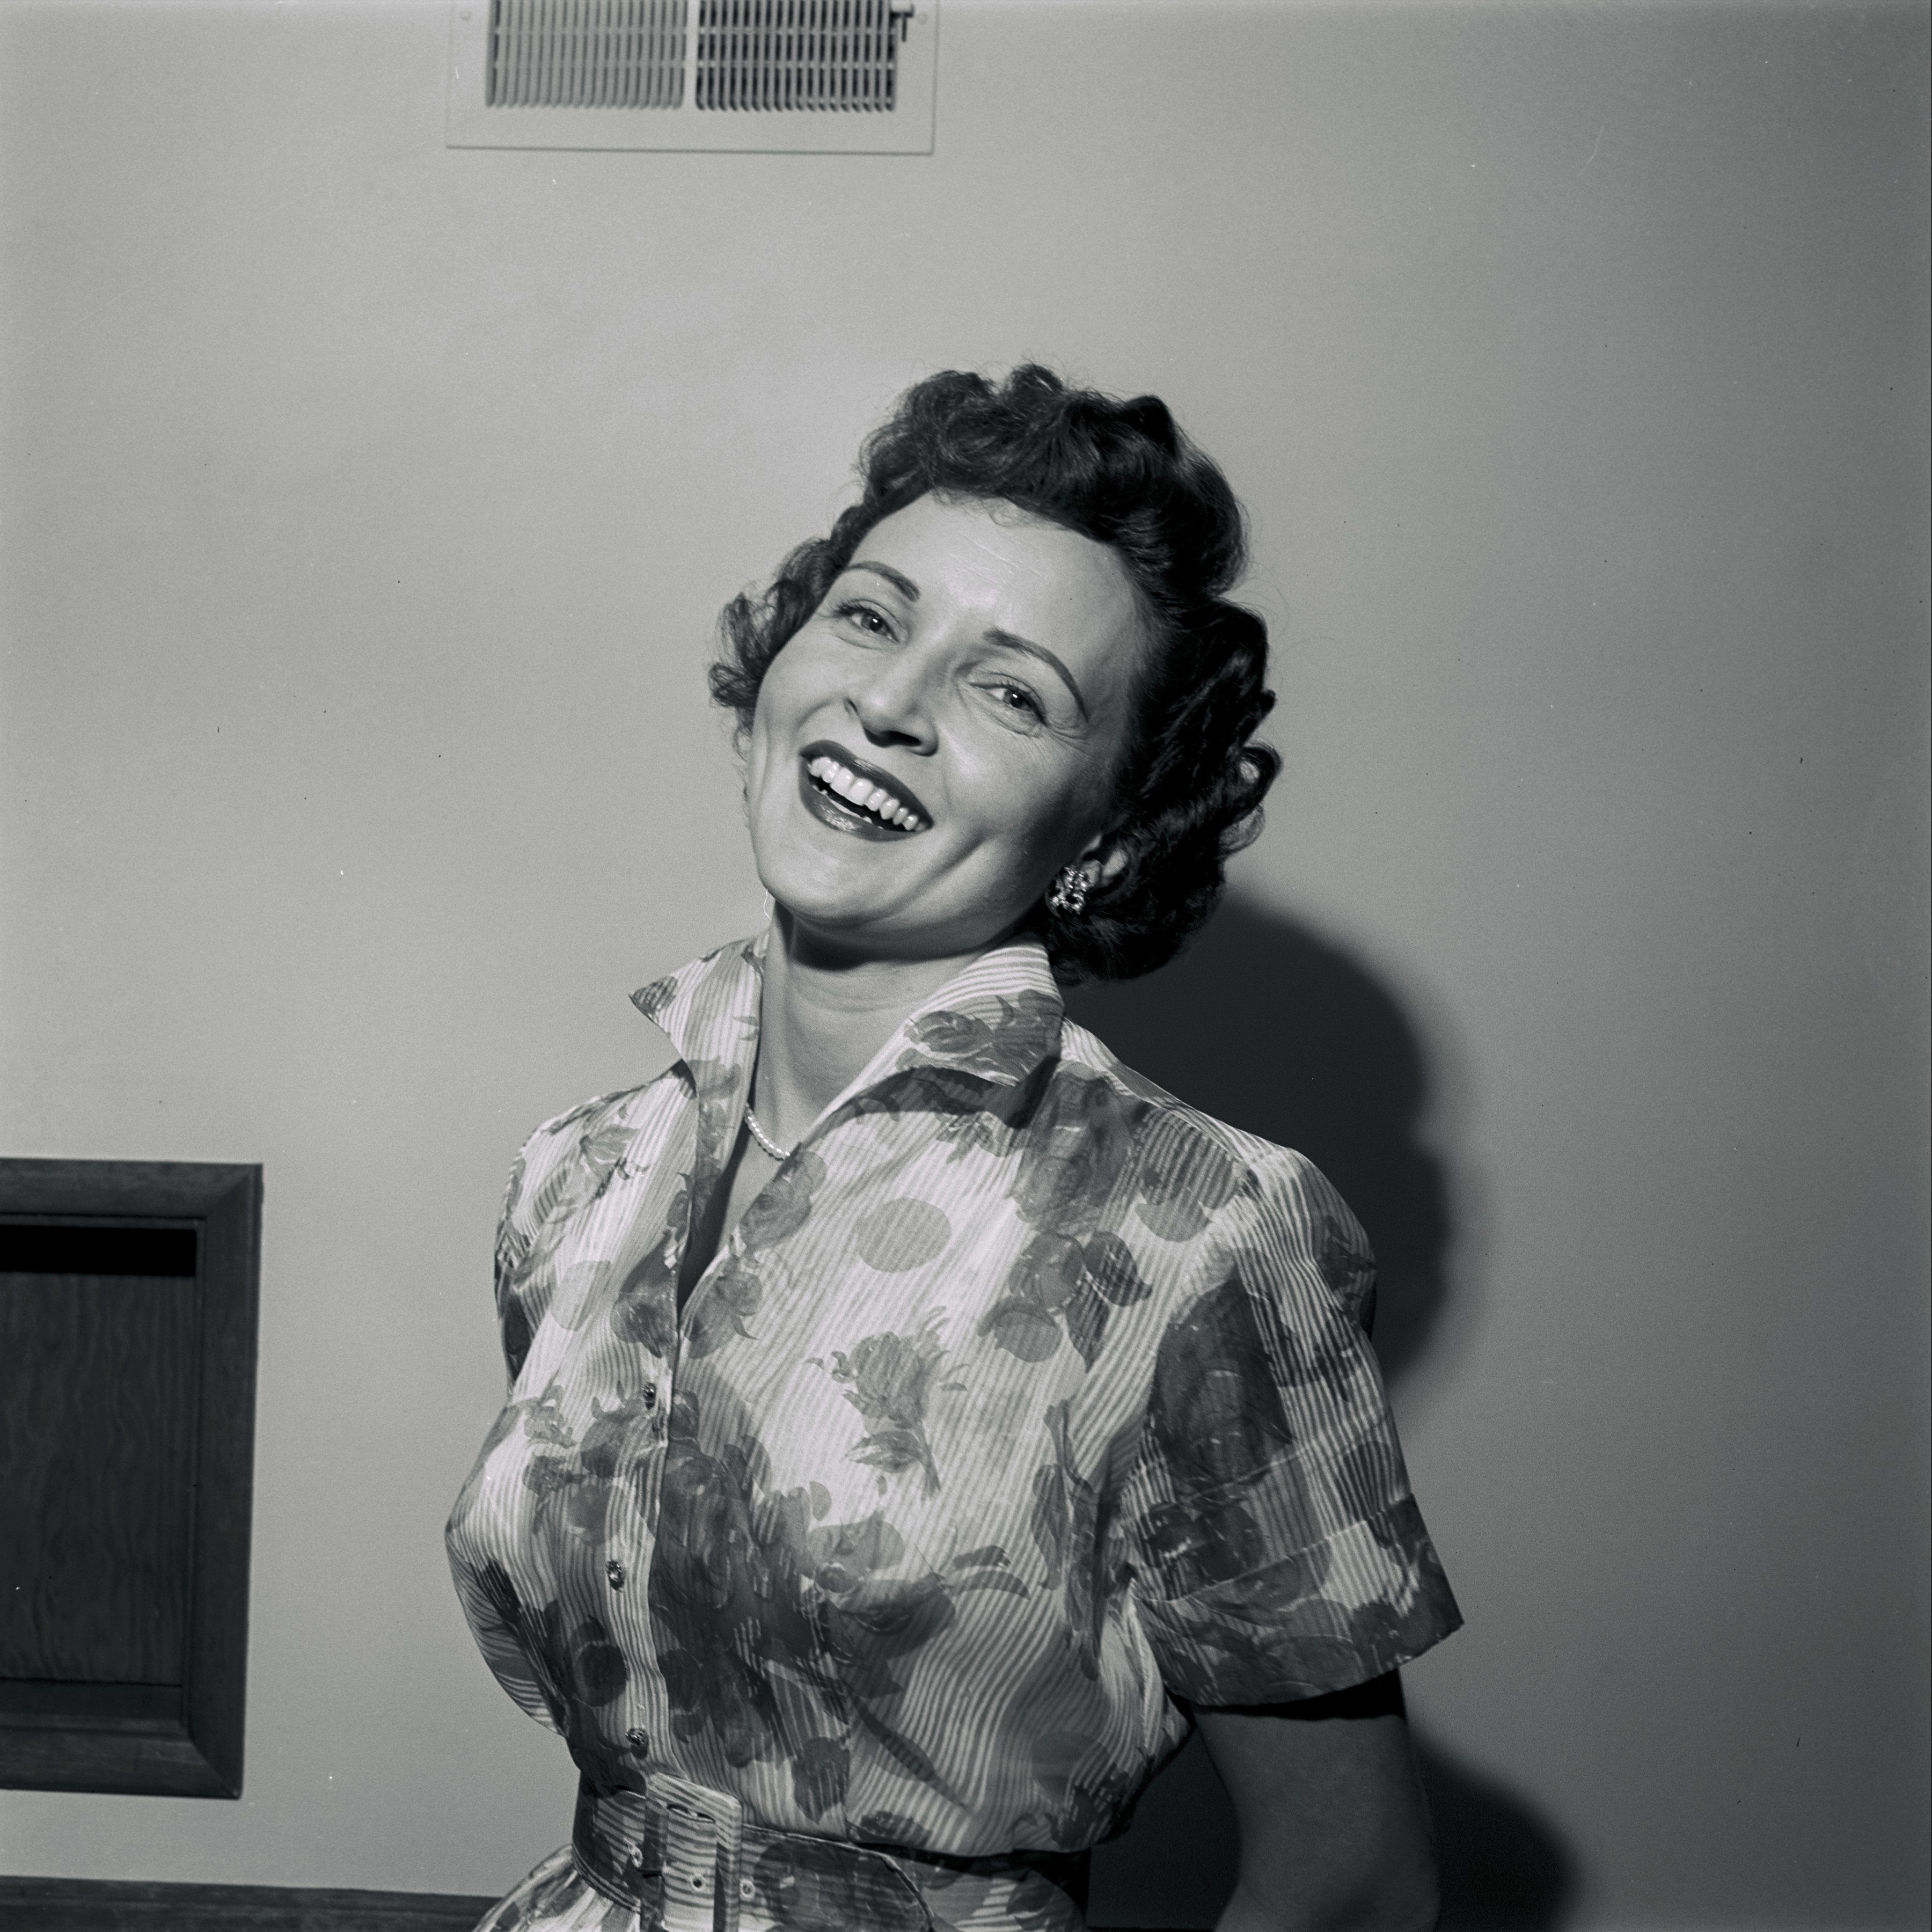 Black and white photo portrait of a young Betty White in a floral dress, smiling